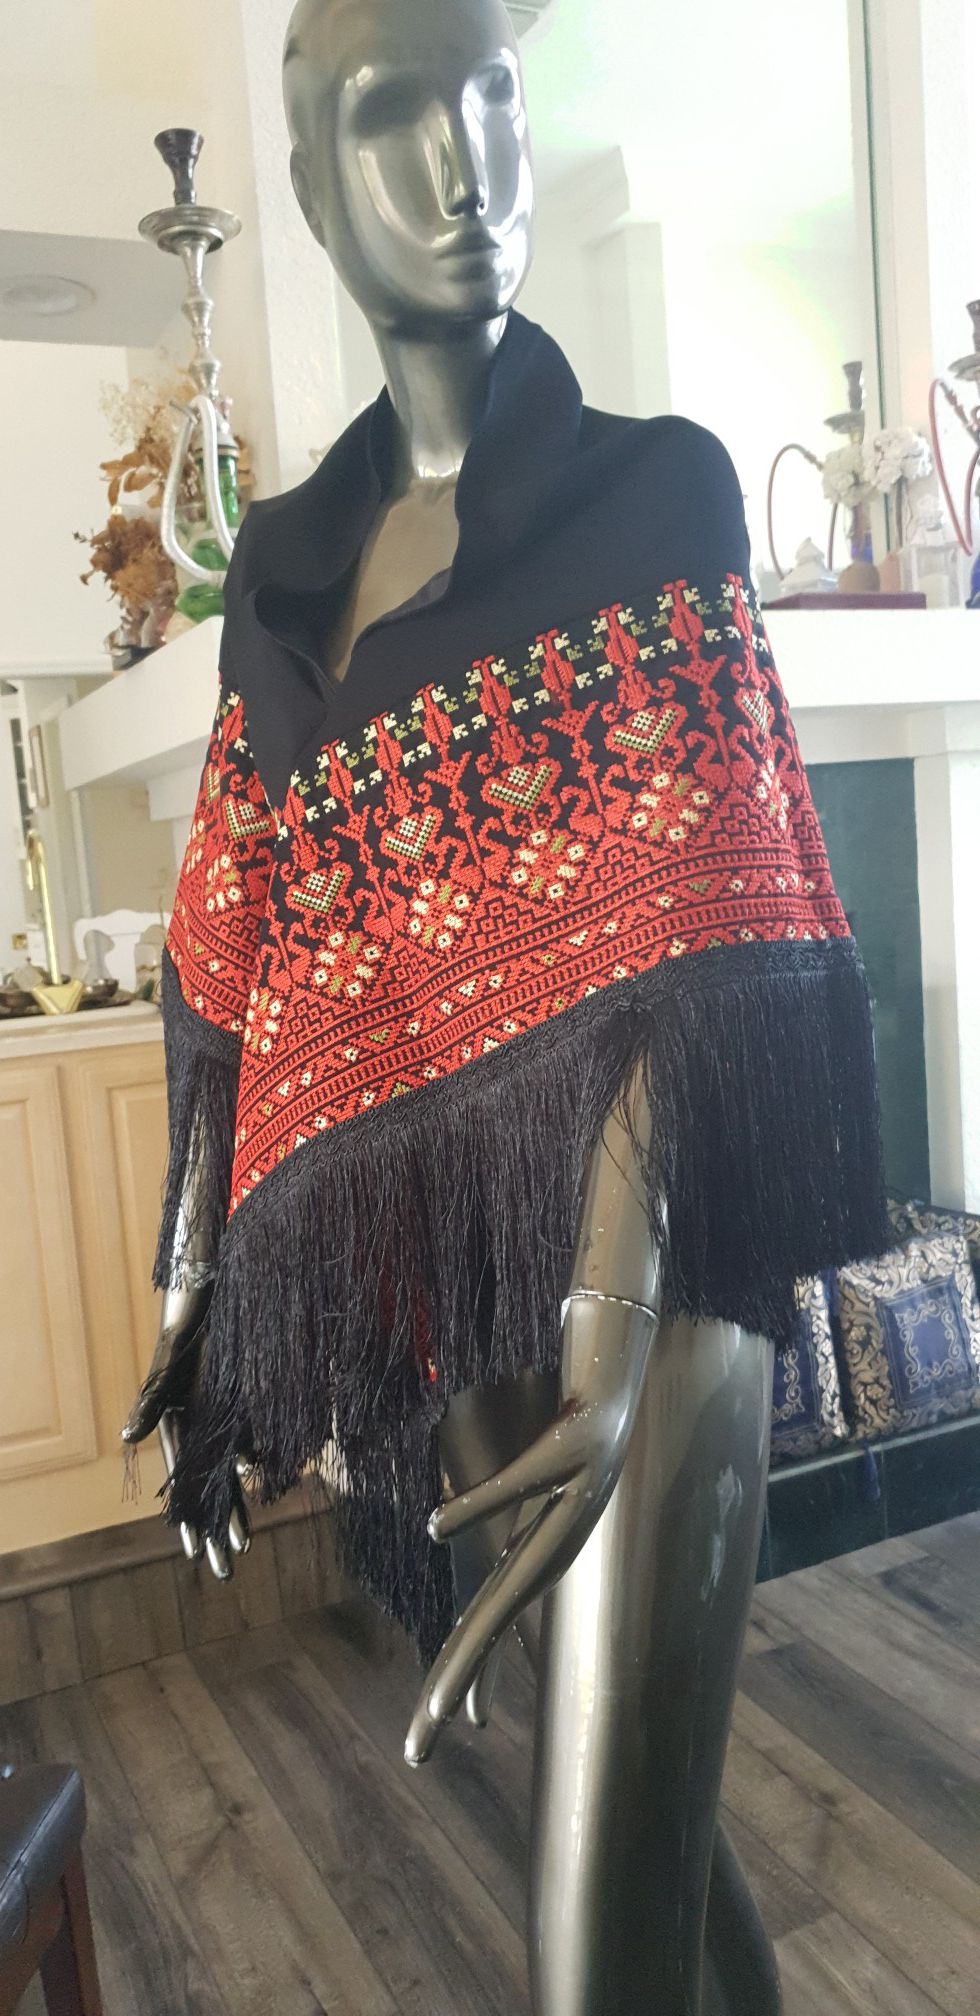 Black Embroidered Shawl / Poncho / Wrap 2 Meters Long with Red or Gold Embroidery and Black Fringe